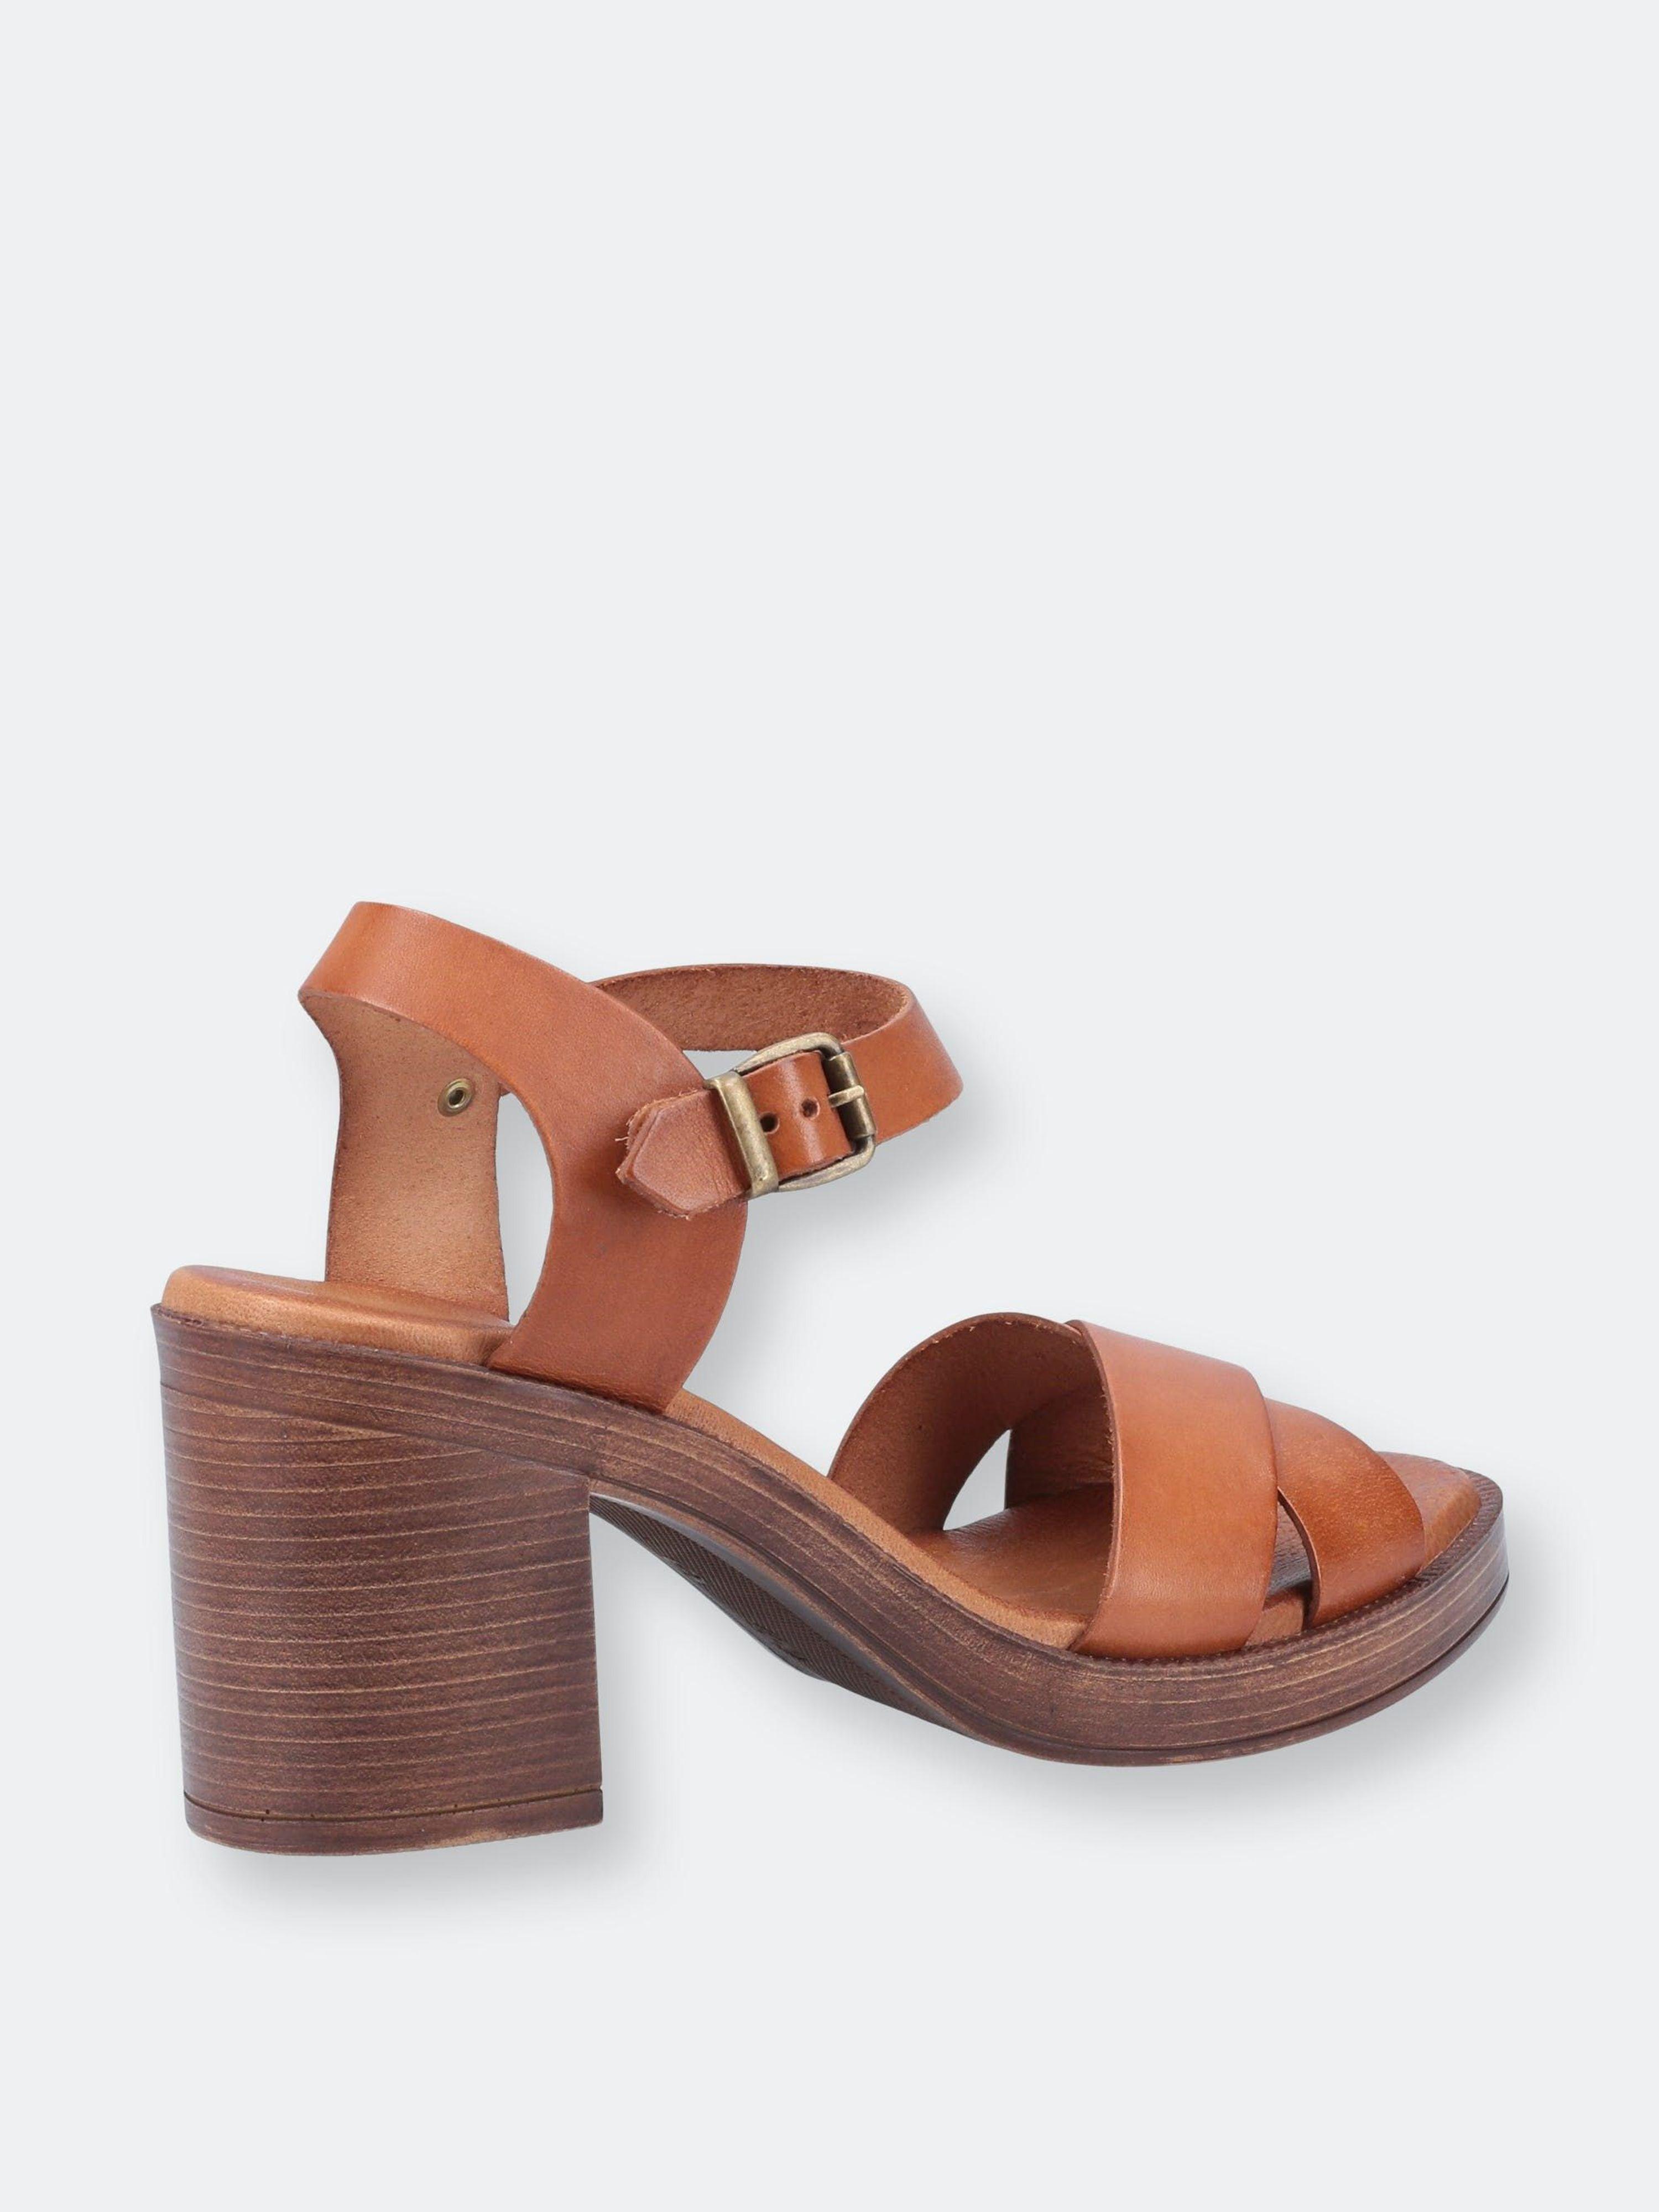 Hush Puppies Georgia Leather Heeled Sandals in Brown | Lyst